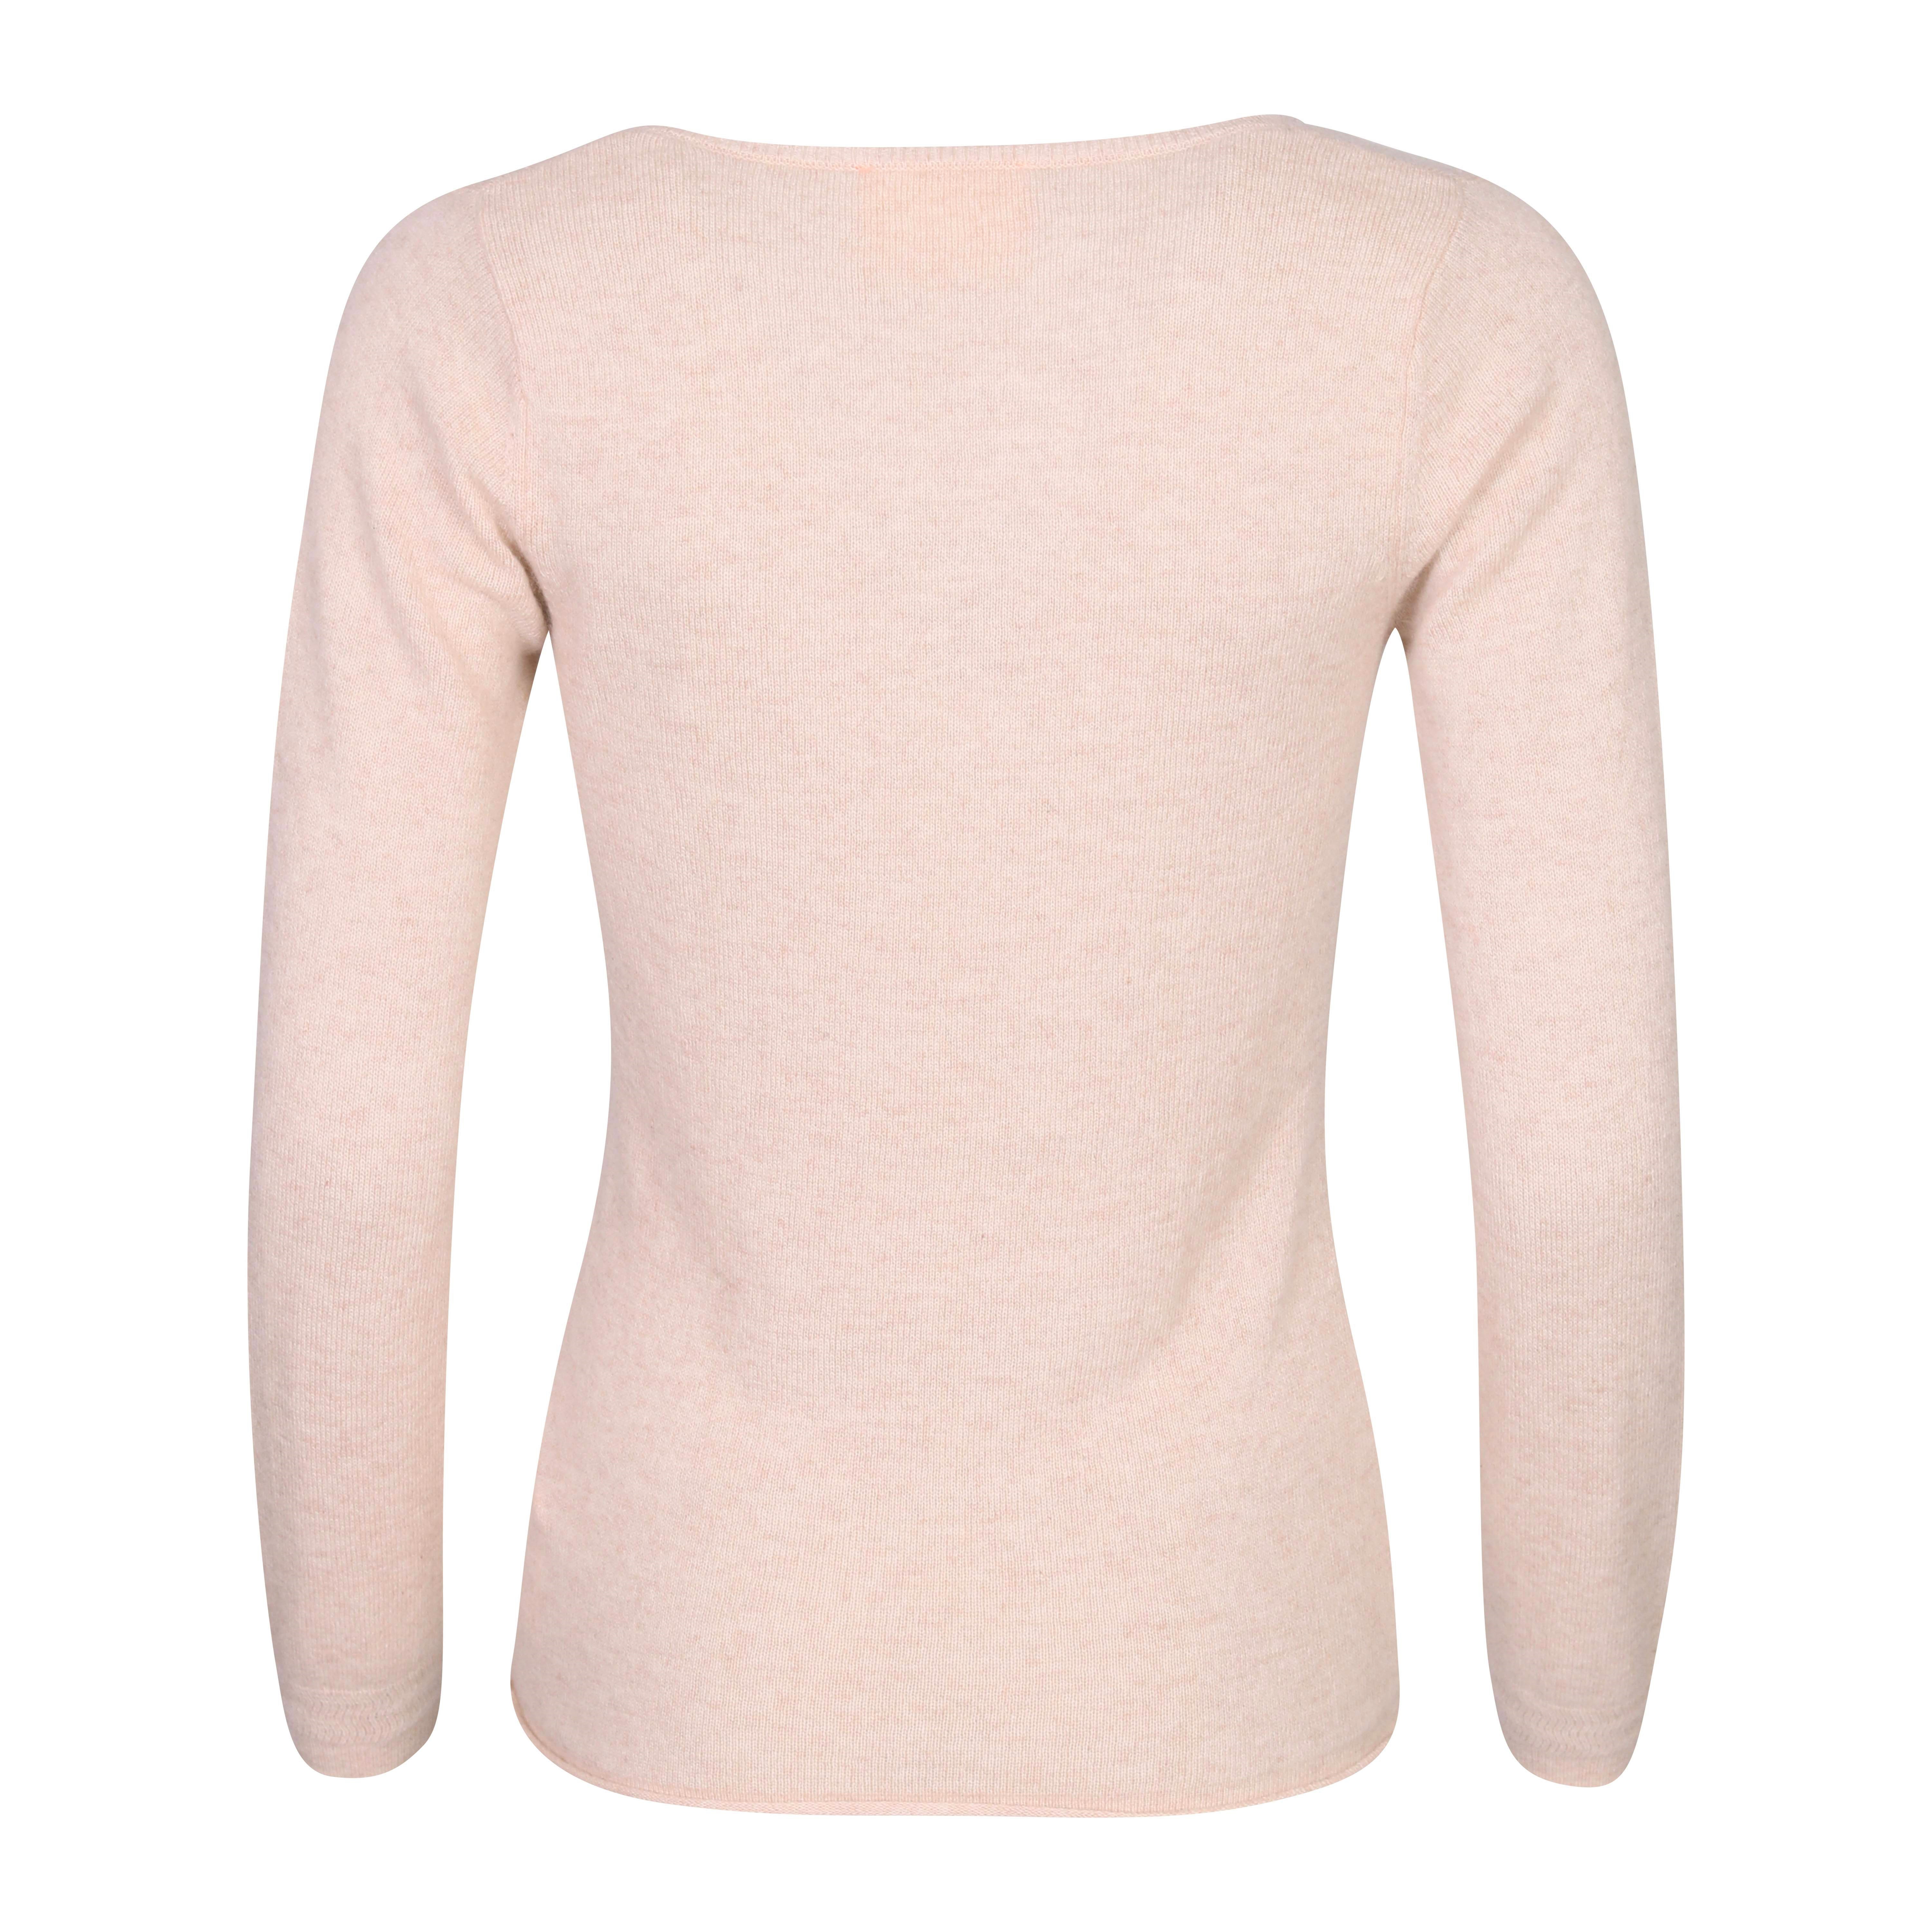 Absolut Cashmere Fitted V-Neck Sweater Arielle in Beige S